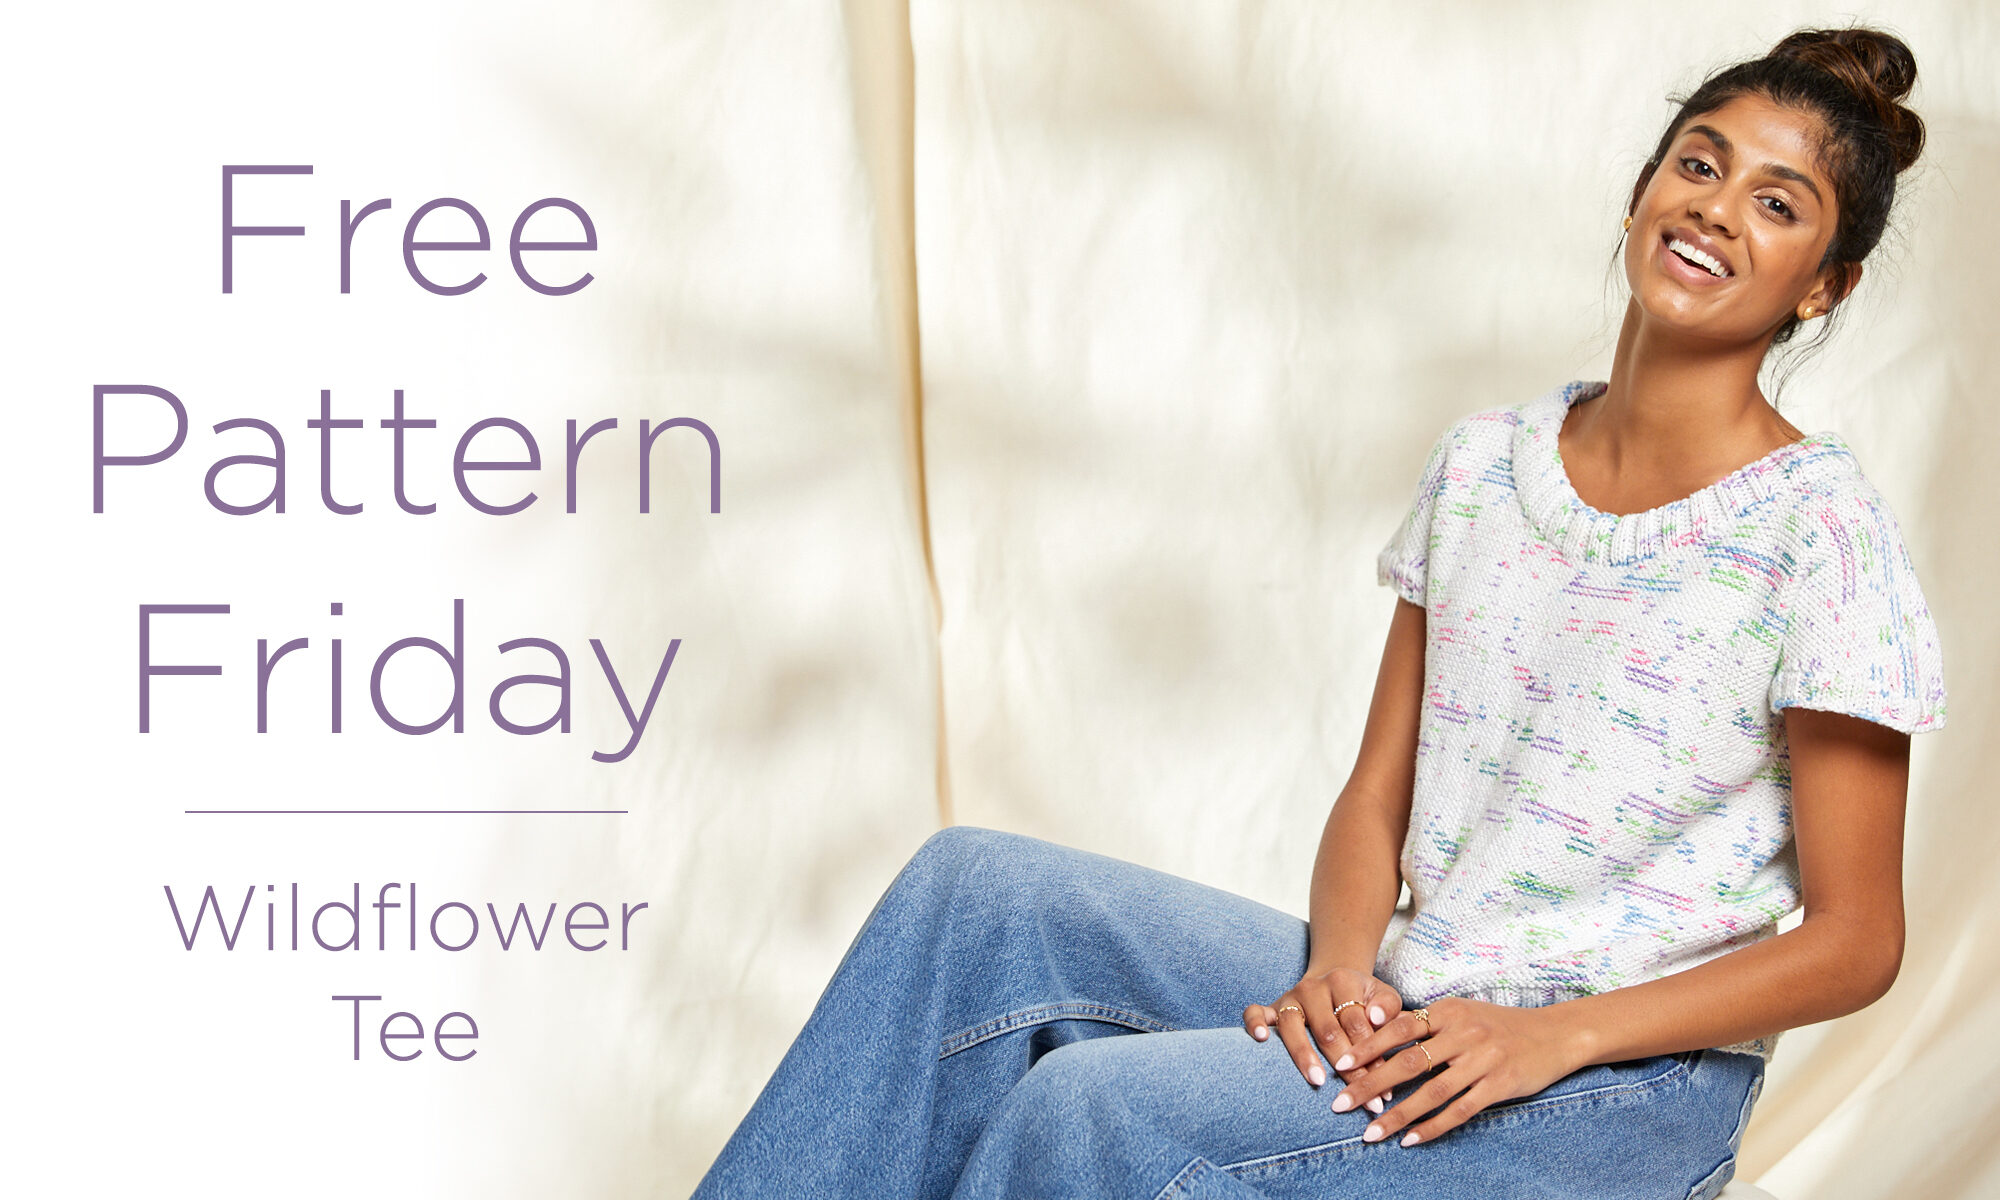 Photo of a person sitting down with the Wildflower Tee on with text to the left saying "Free Pattern Friday - Wildflower Tee"